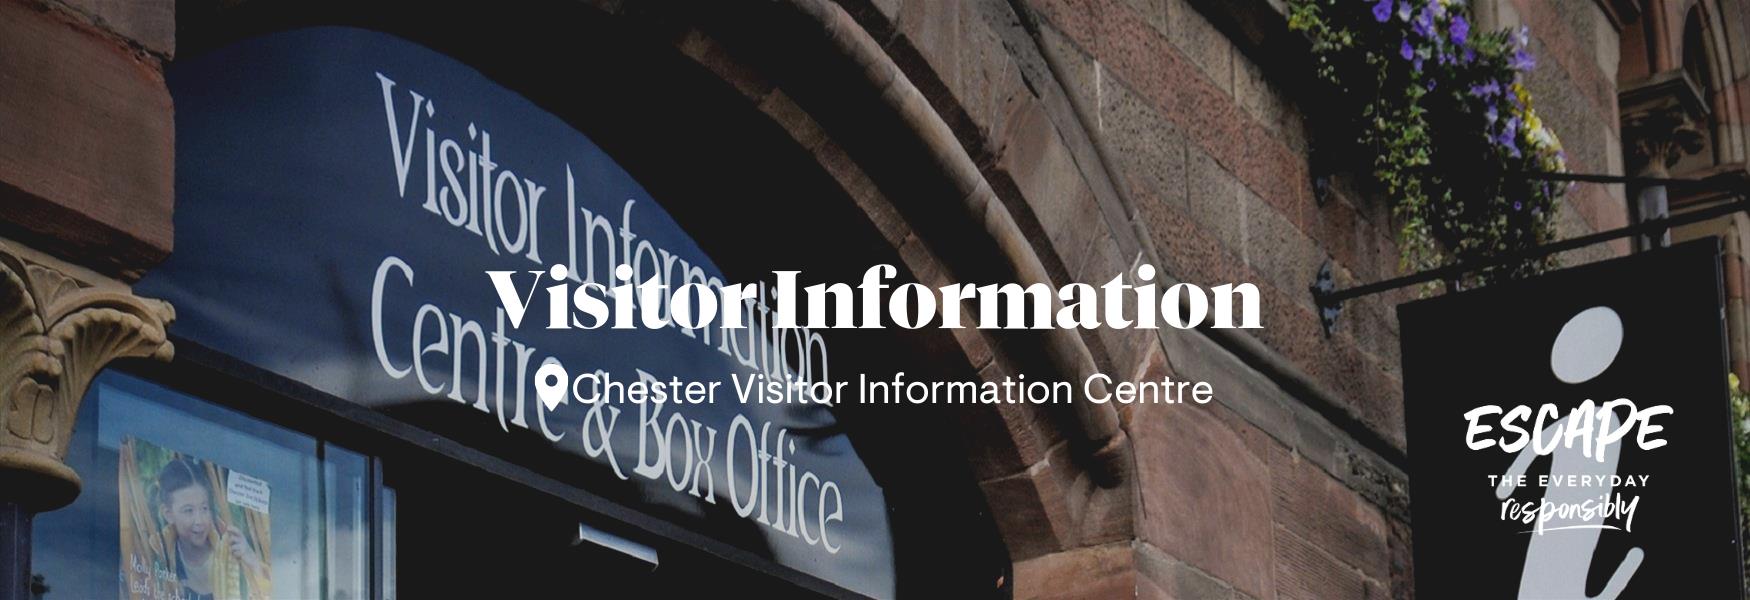 Cheshire Visitor Information